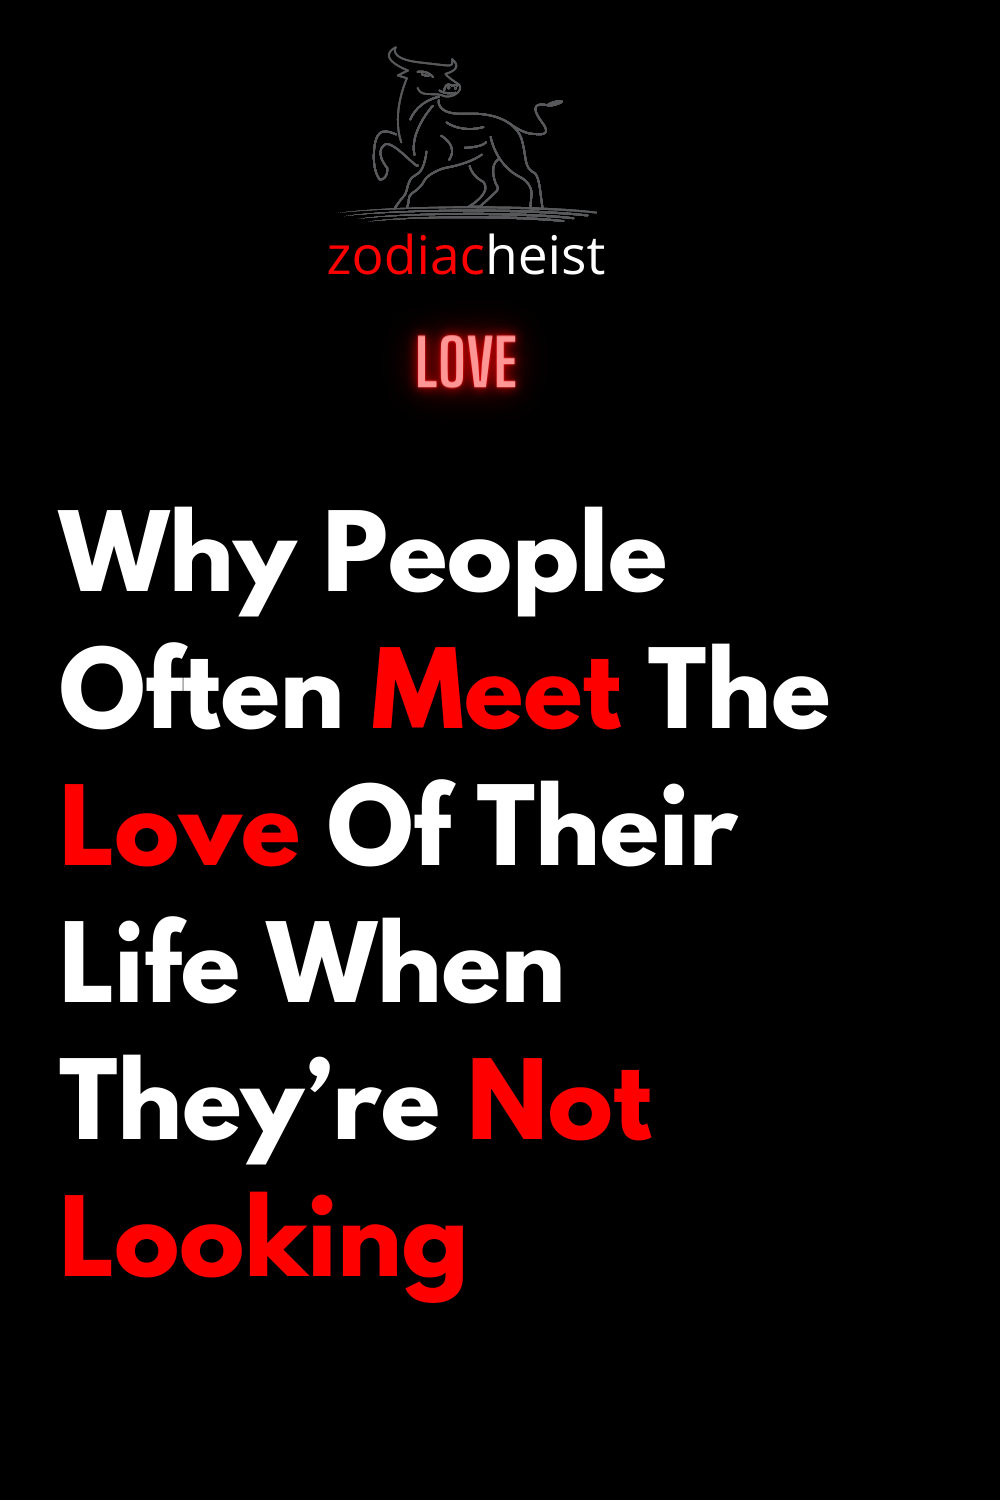 Why People Often Meet The Love Of Their Life When They’re Not Looking